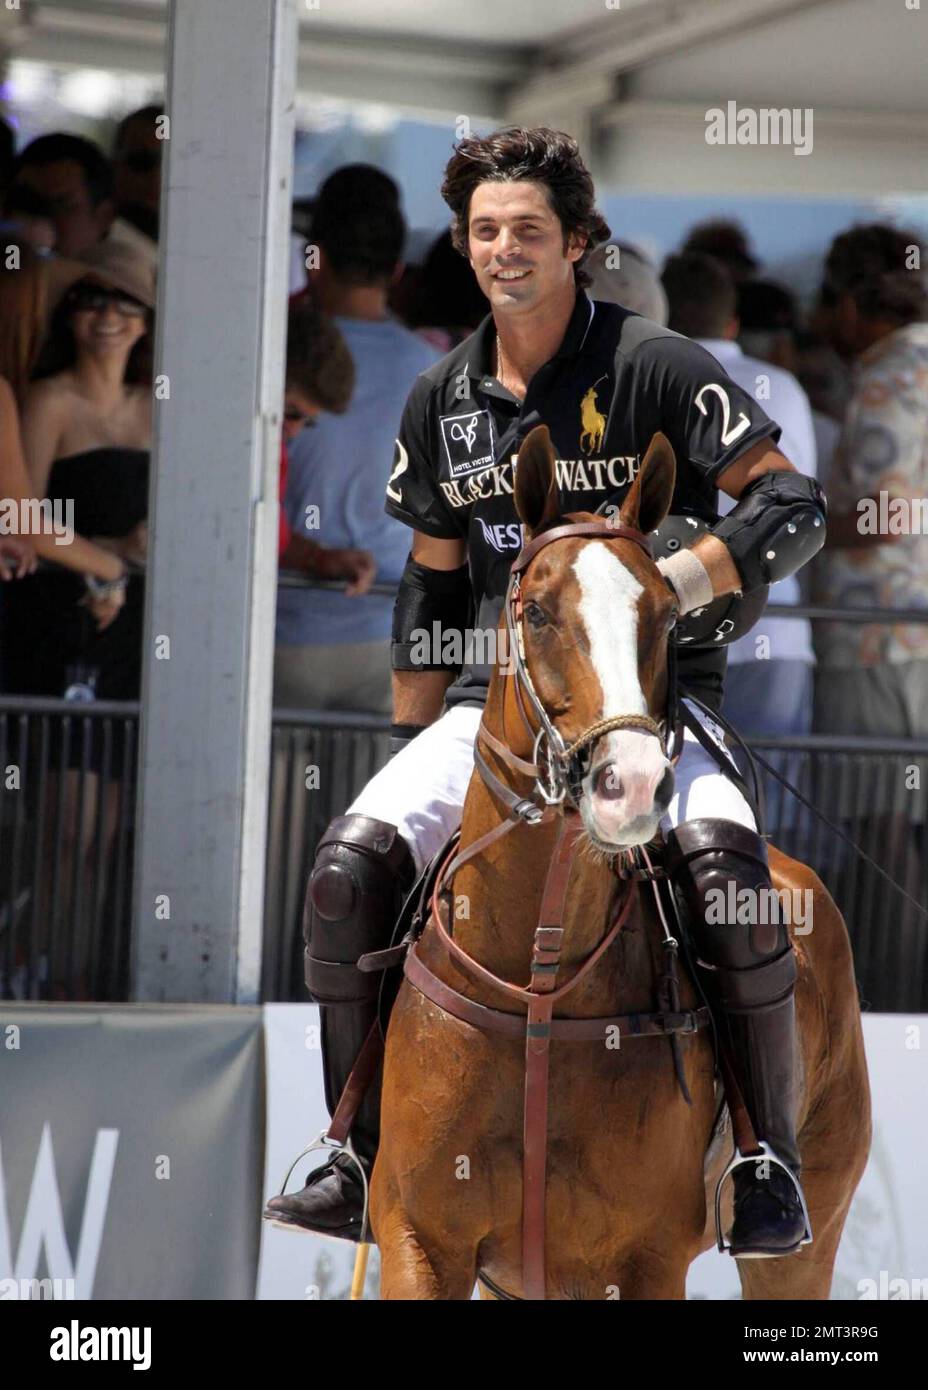 Nacho Figueras, Ralph Lauren model and member of the BlackWatch polo team,  is joined by his wife, Delfina Blaquier, while participating at the 2009  Miami Beach Polo World Cup in Miami Beach,